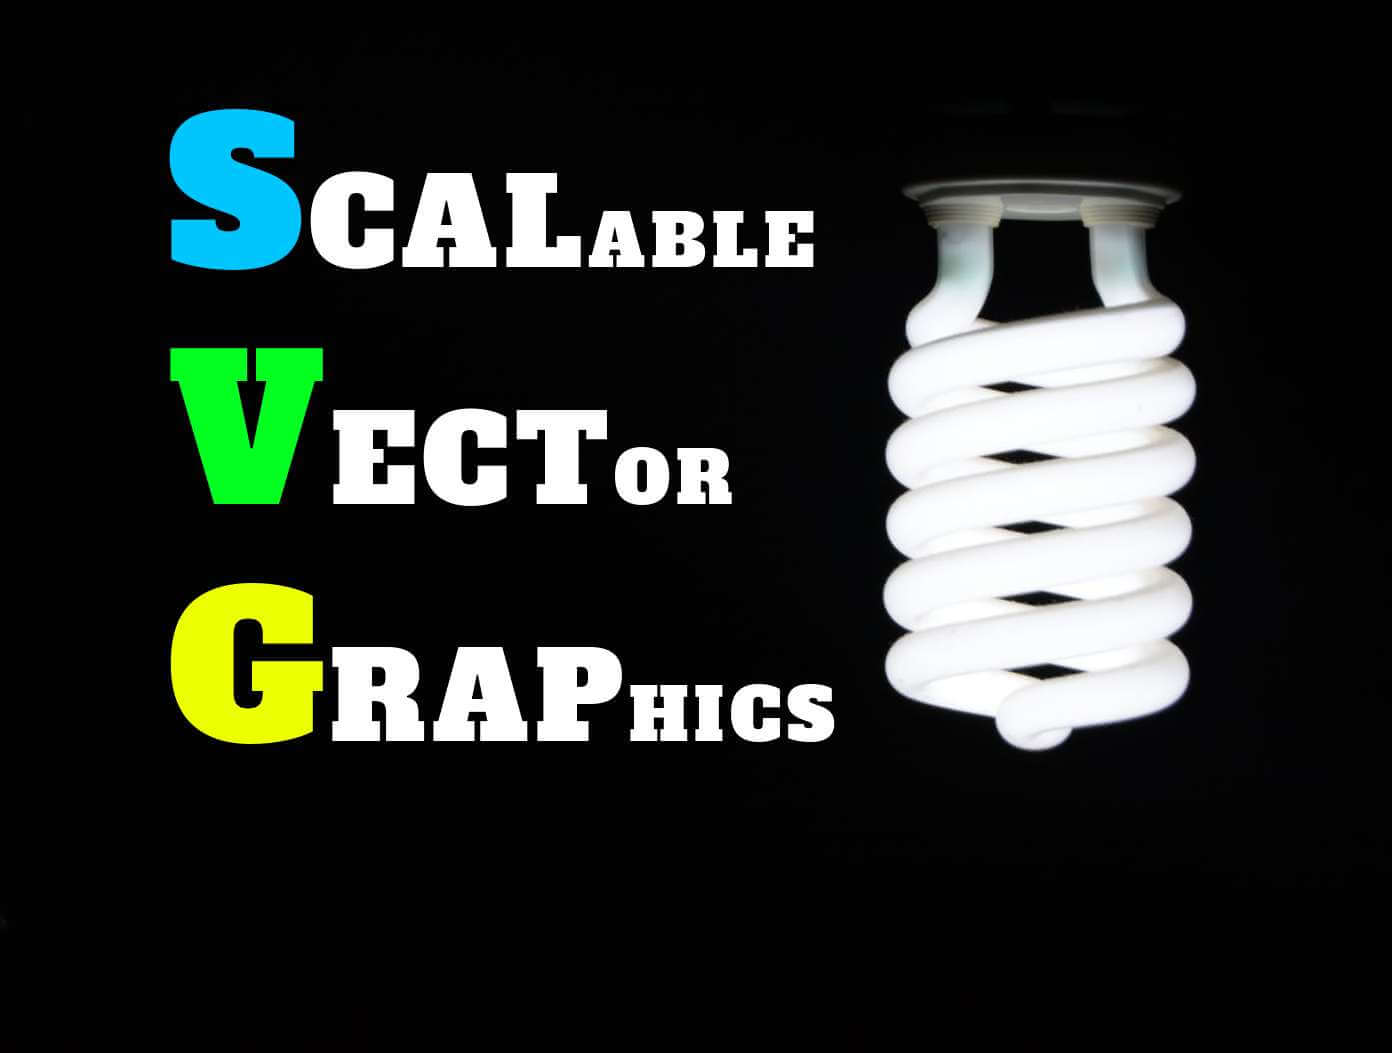 An Introduction to SVG & Comparison of different Image Formats